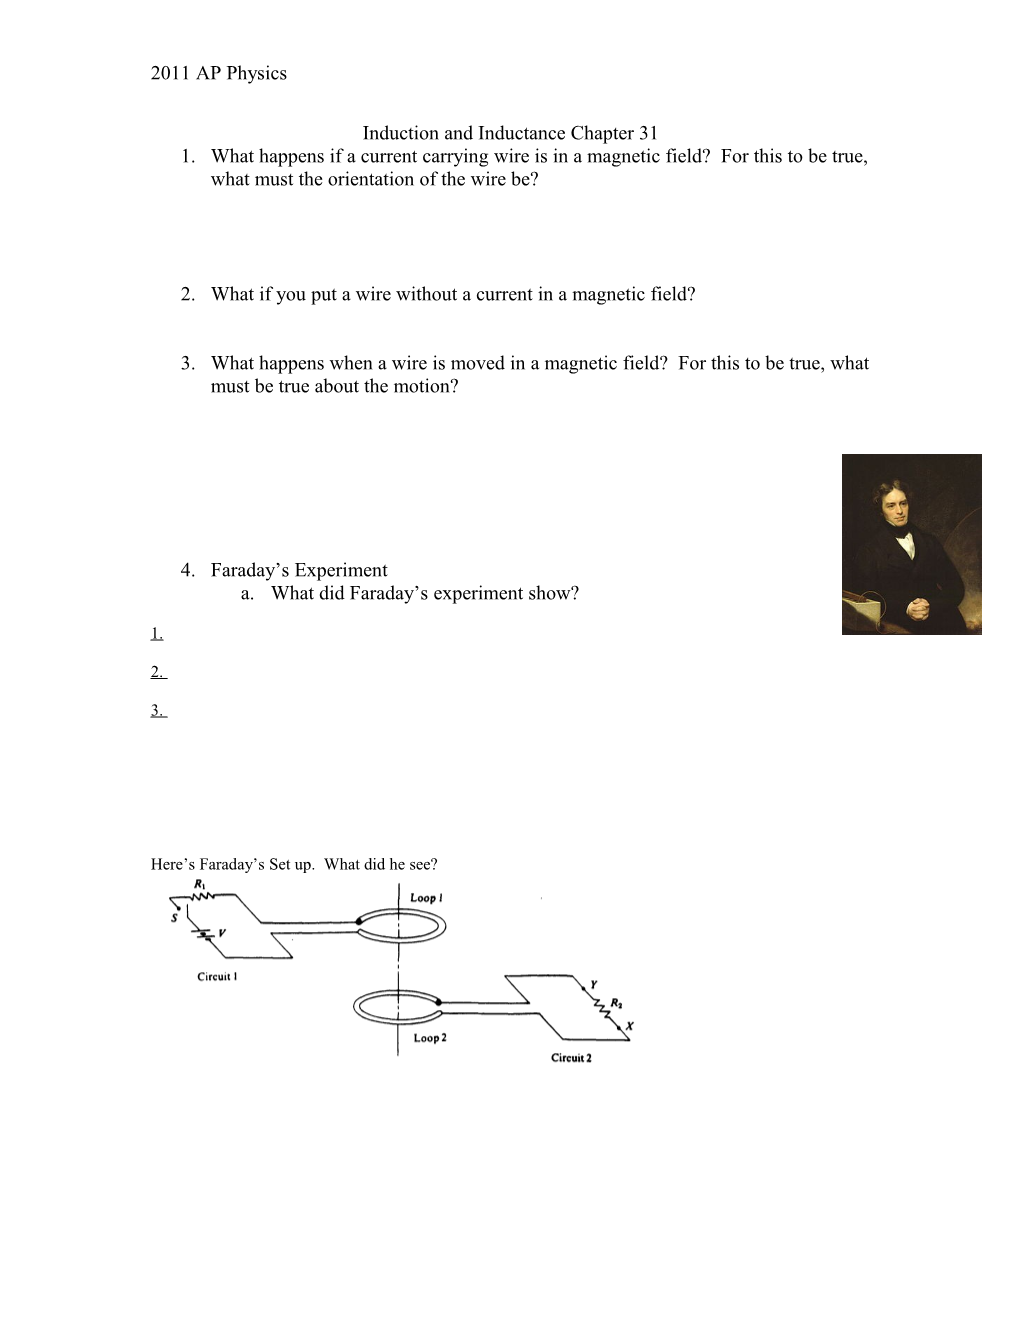 Induction and Inductance Chapter 31